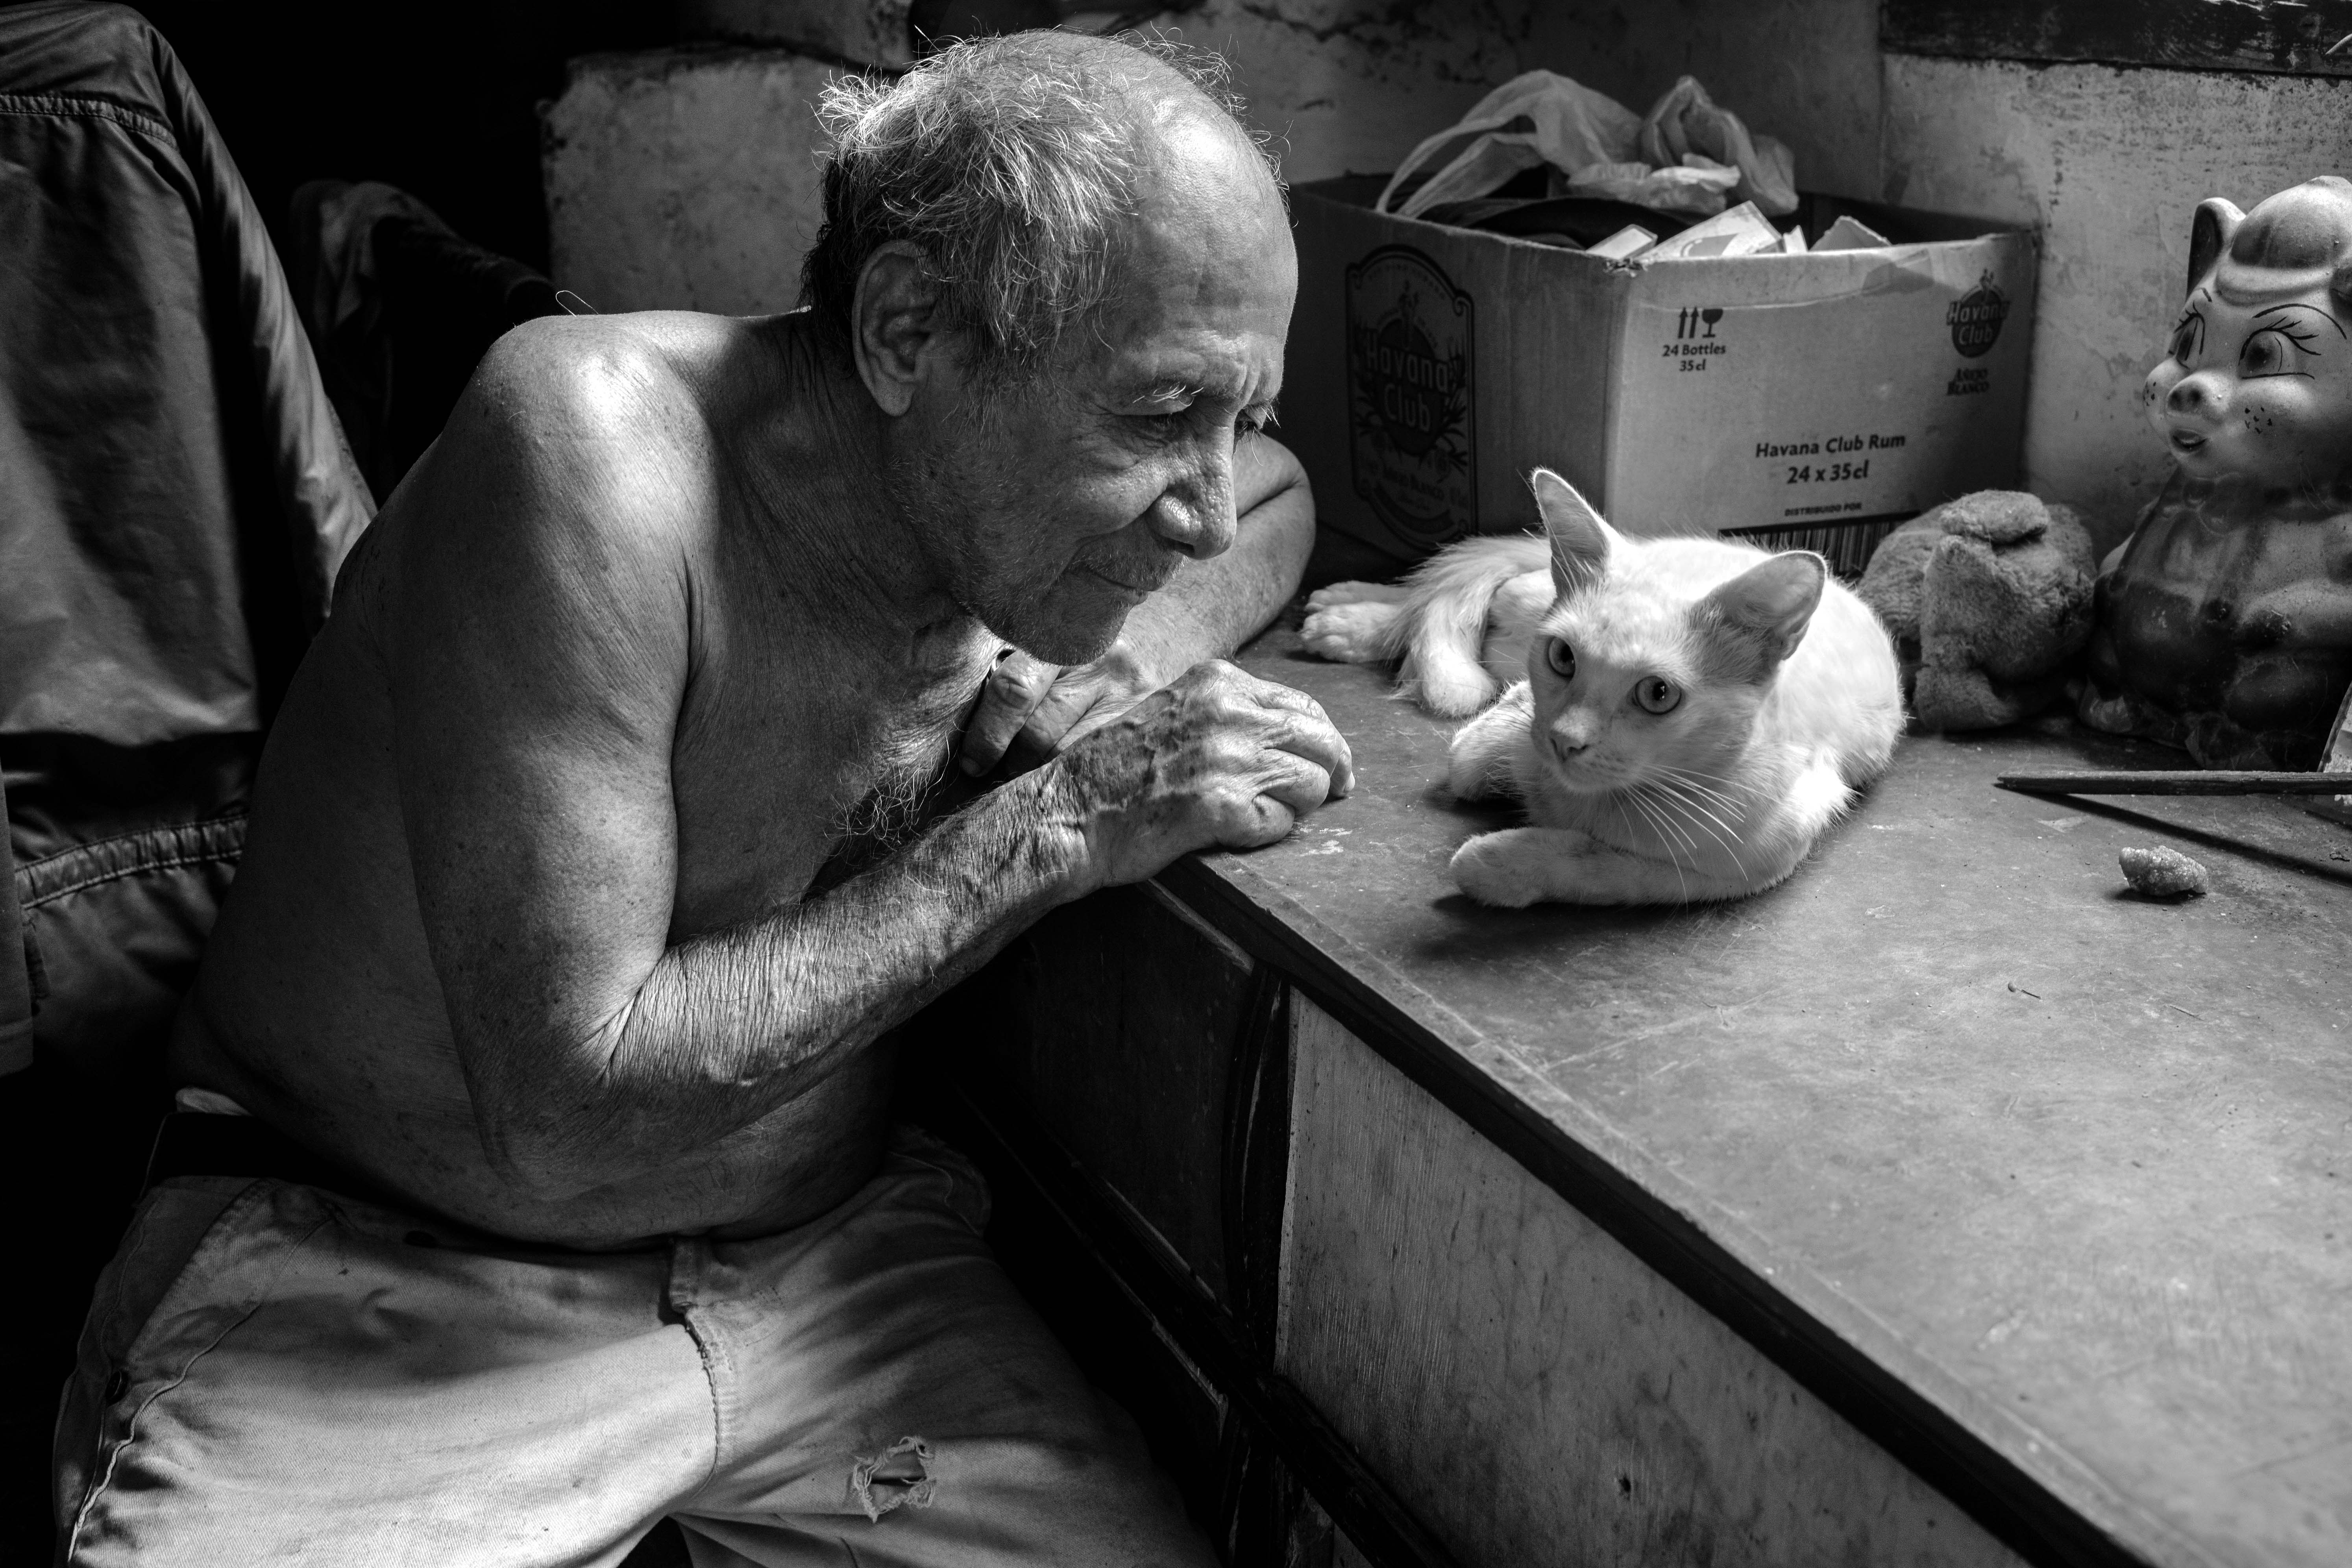 Luis Casadevall: Cuba Black and White Street Photography Feedback and Critique